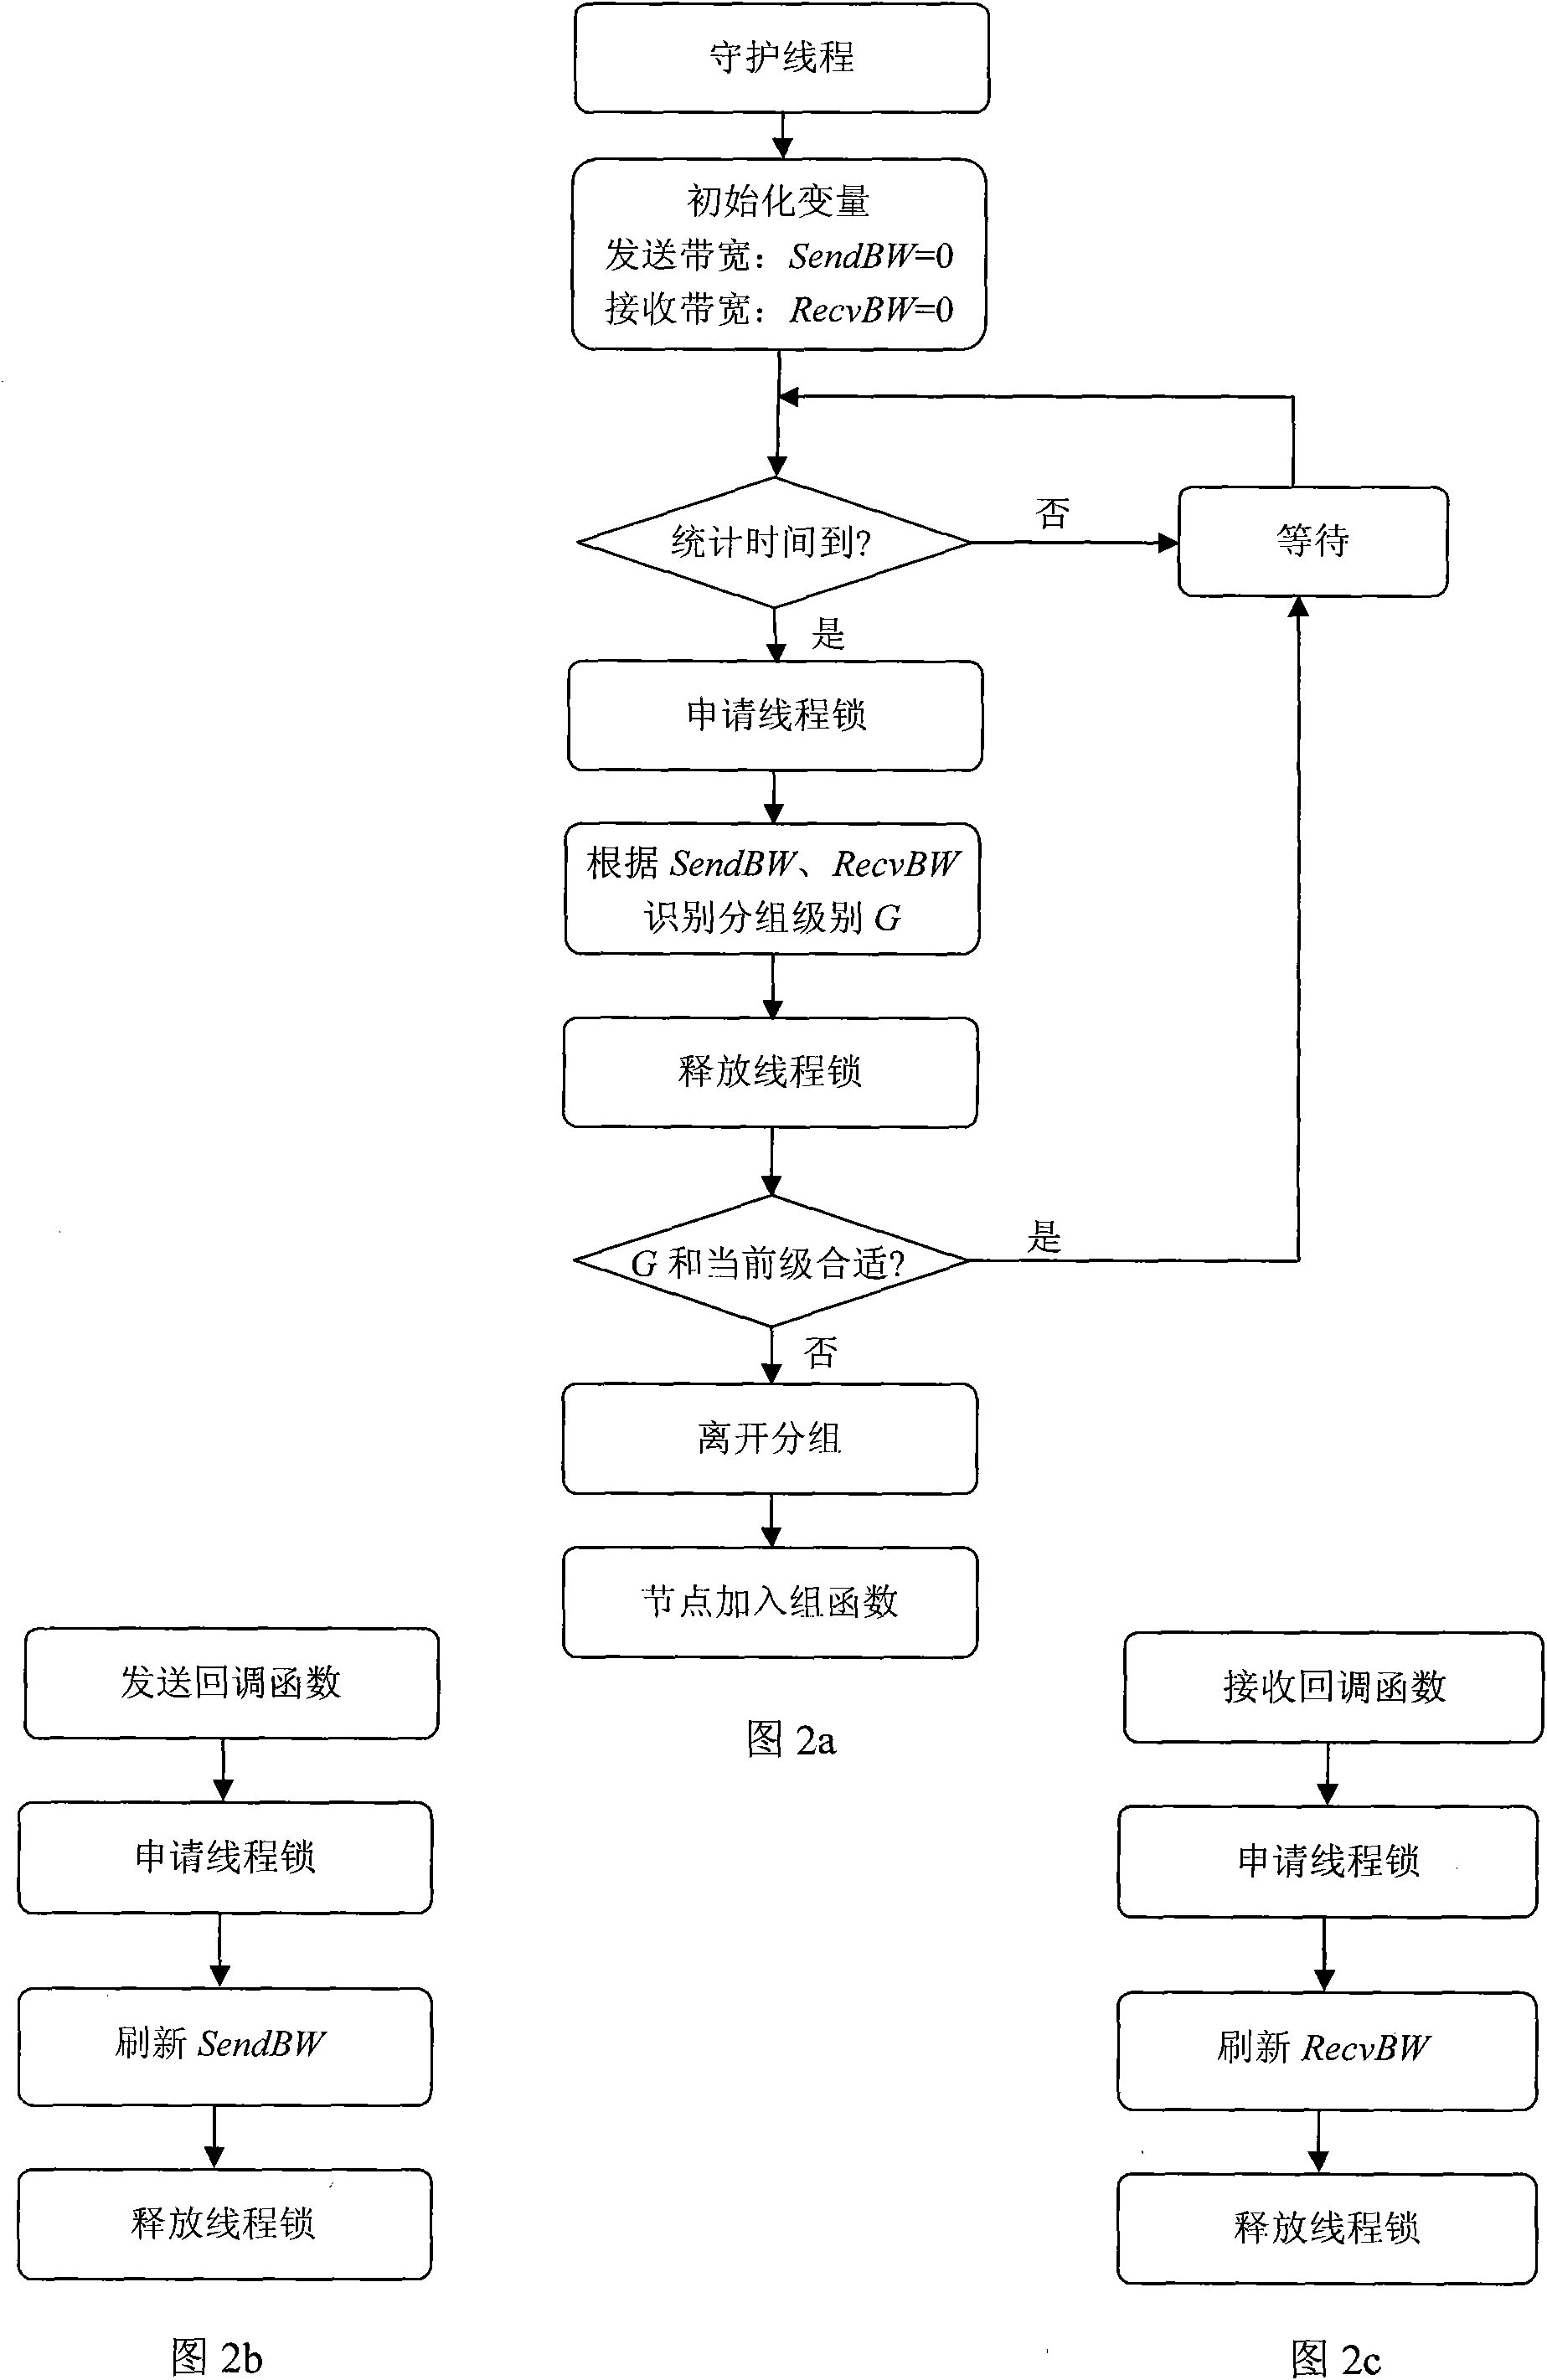 Data transmission sharing method of network topography system based on P2P